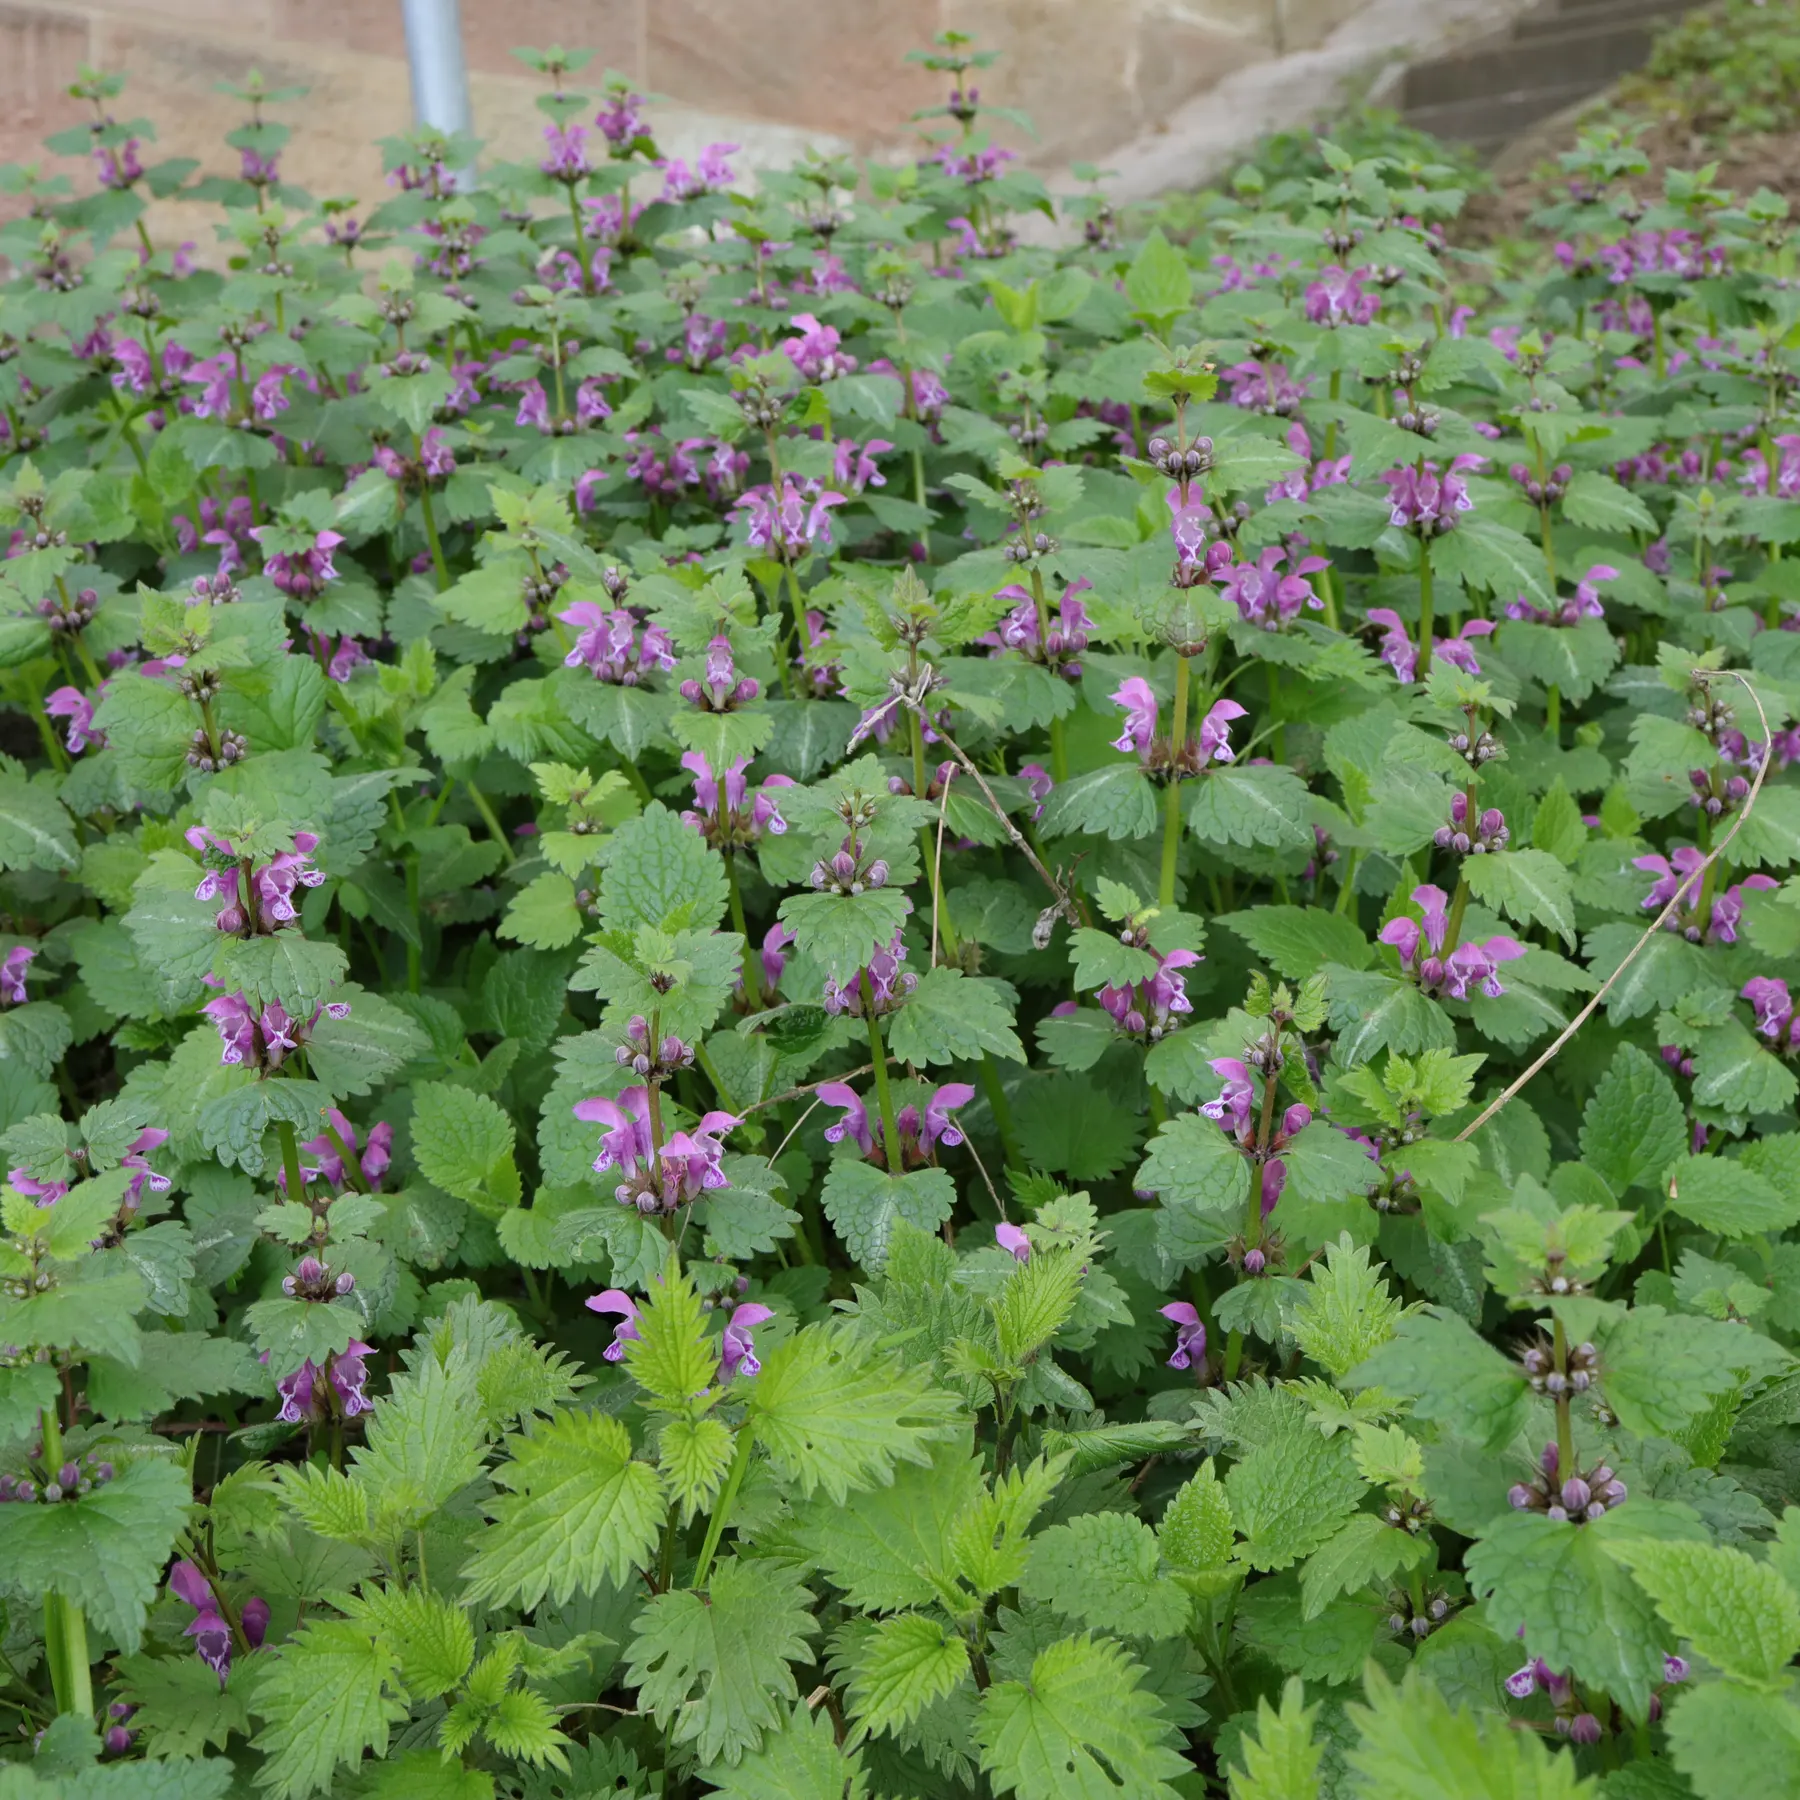 Spotted dead nettle by the wayside